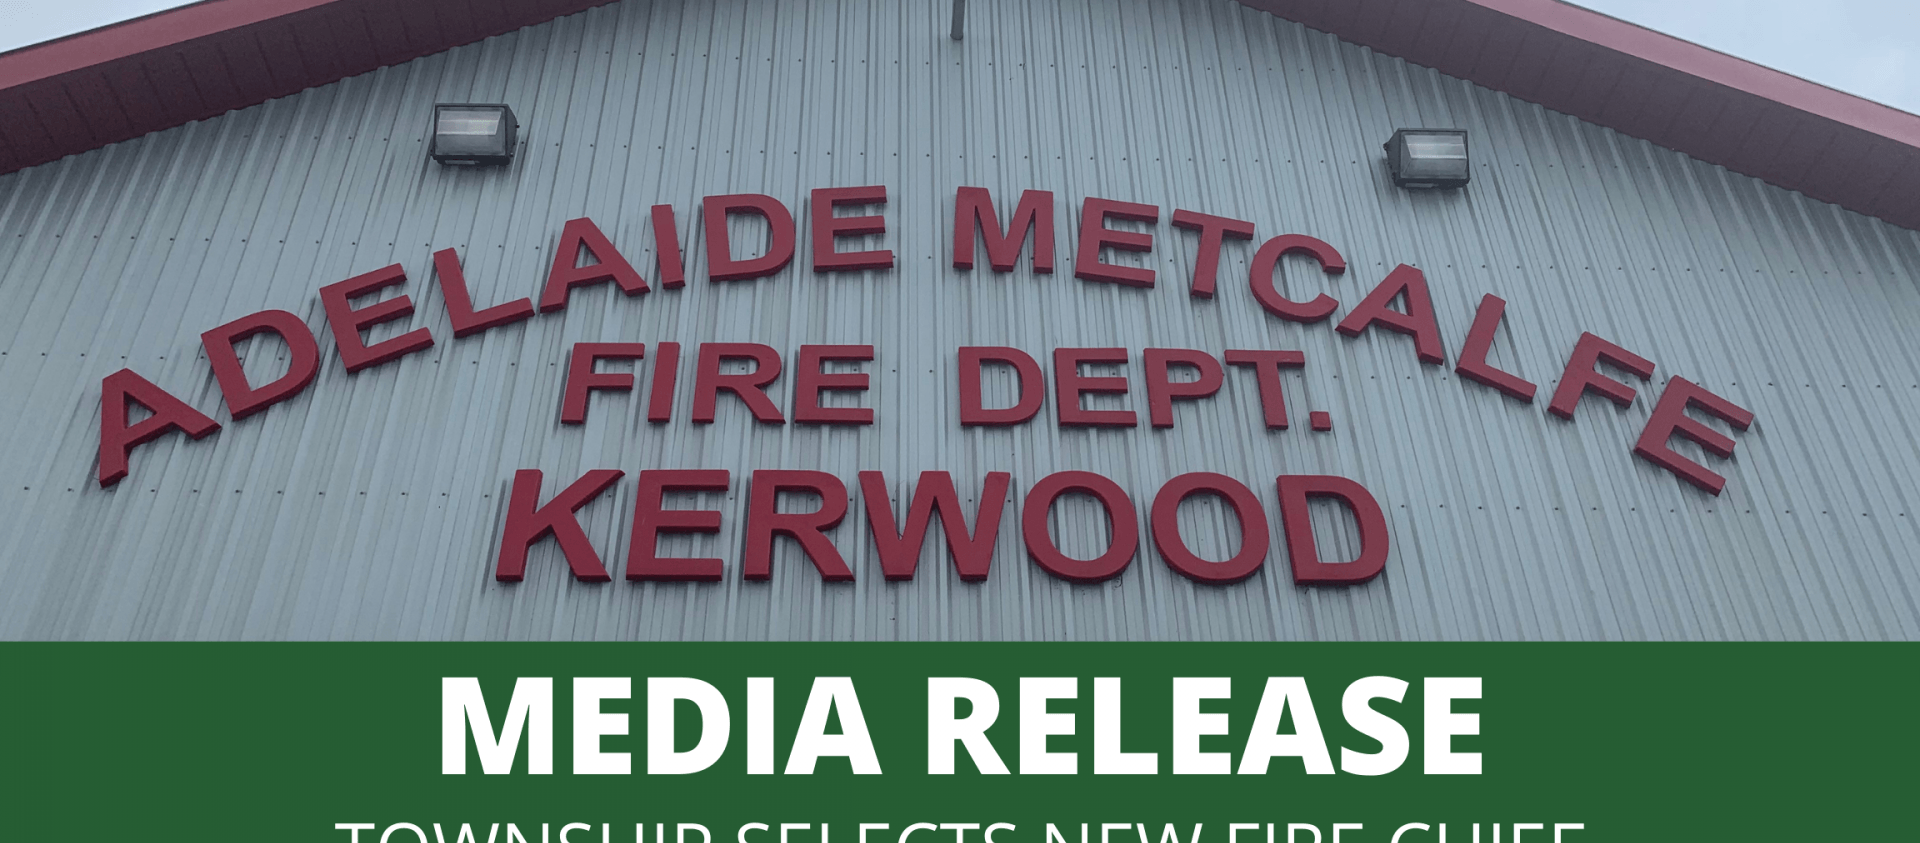 Picture of Kerwood Fire Station with Banner that states Media Release Township selects new fire chief